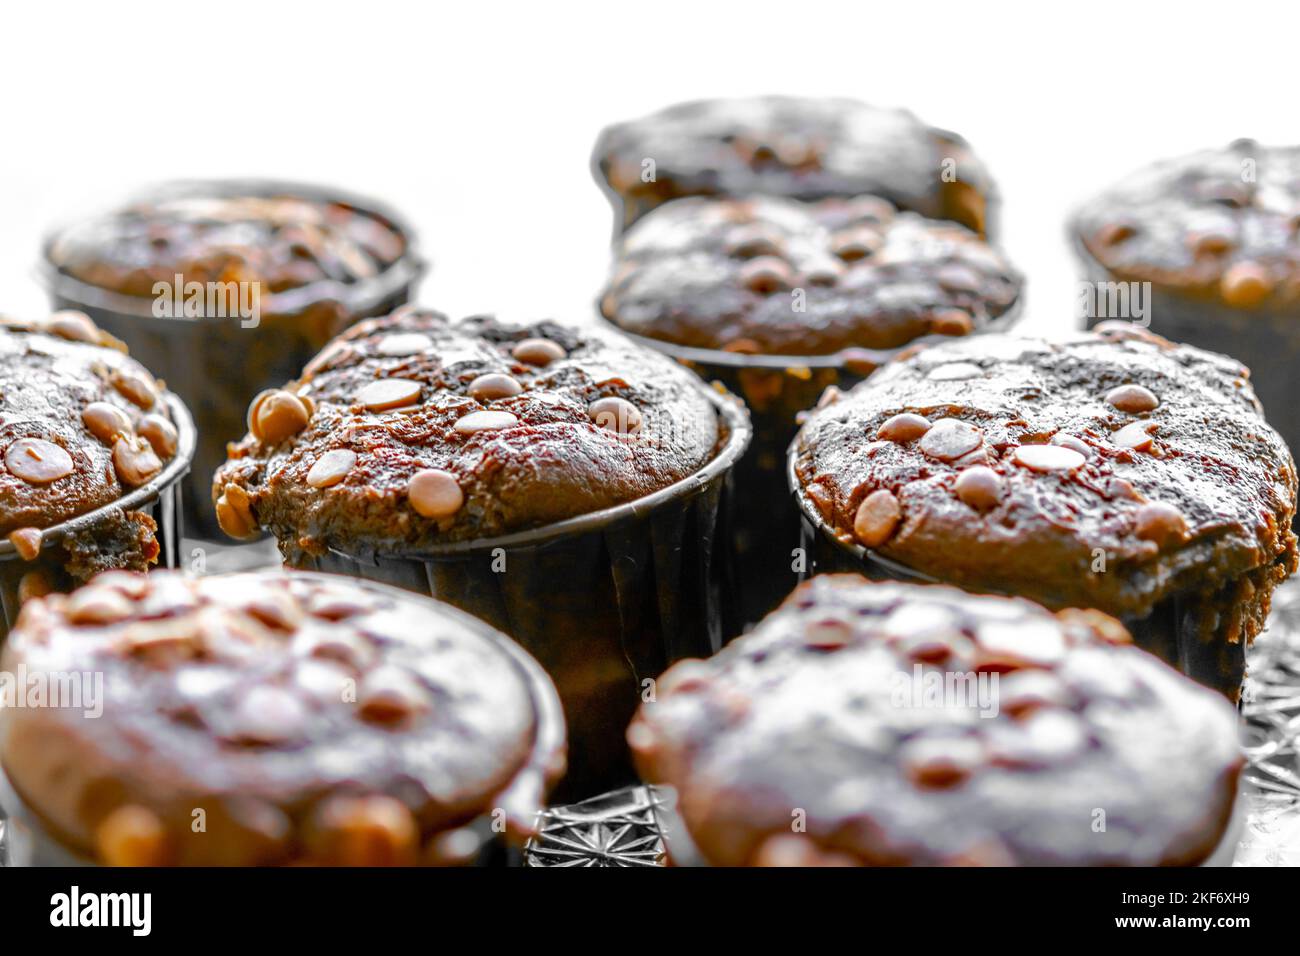 Muffins with chocolate chips homemade close-up macro-photography, white sunlight shining from the side. Selective focus with shallow depth of field. Stock Photo